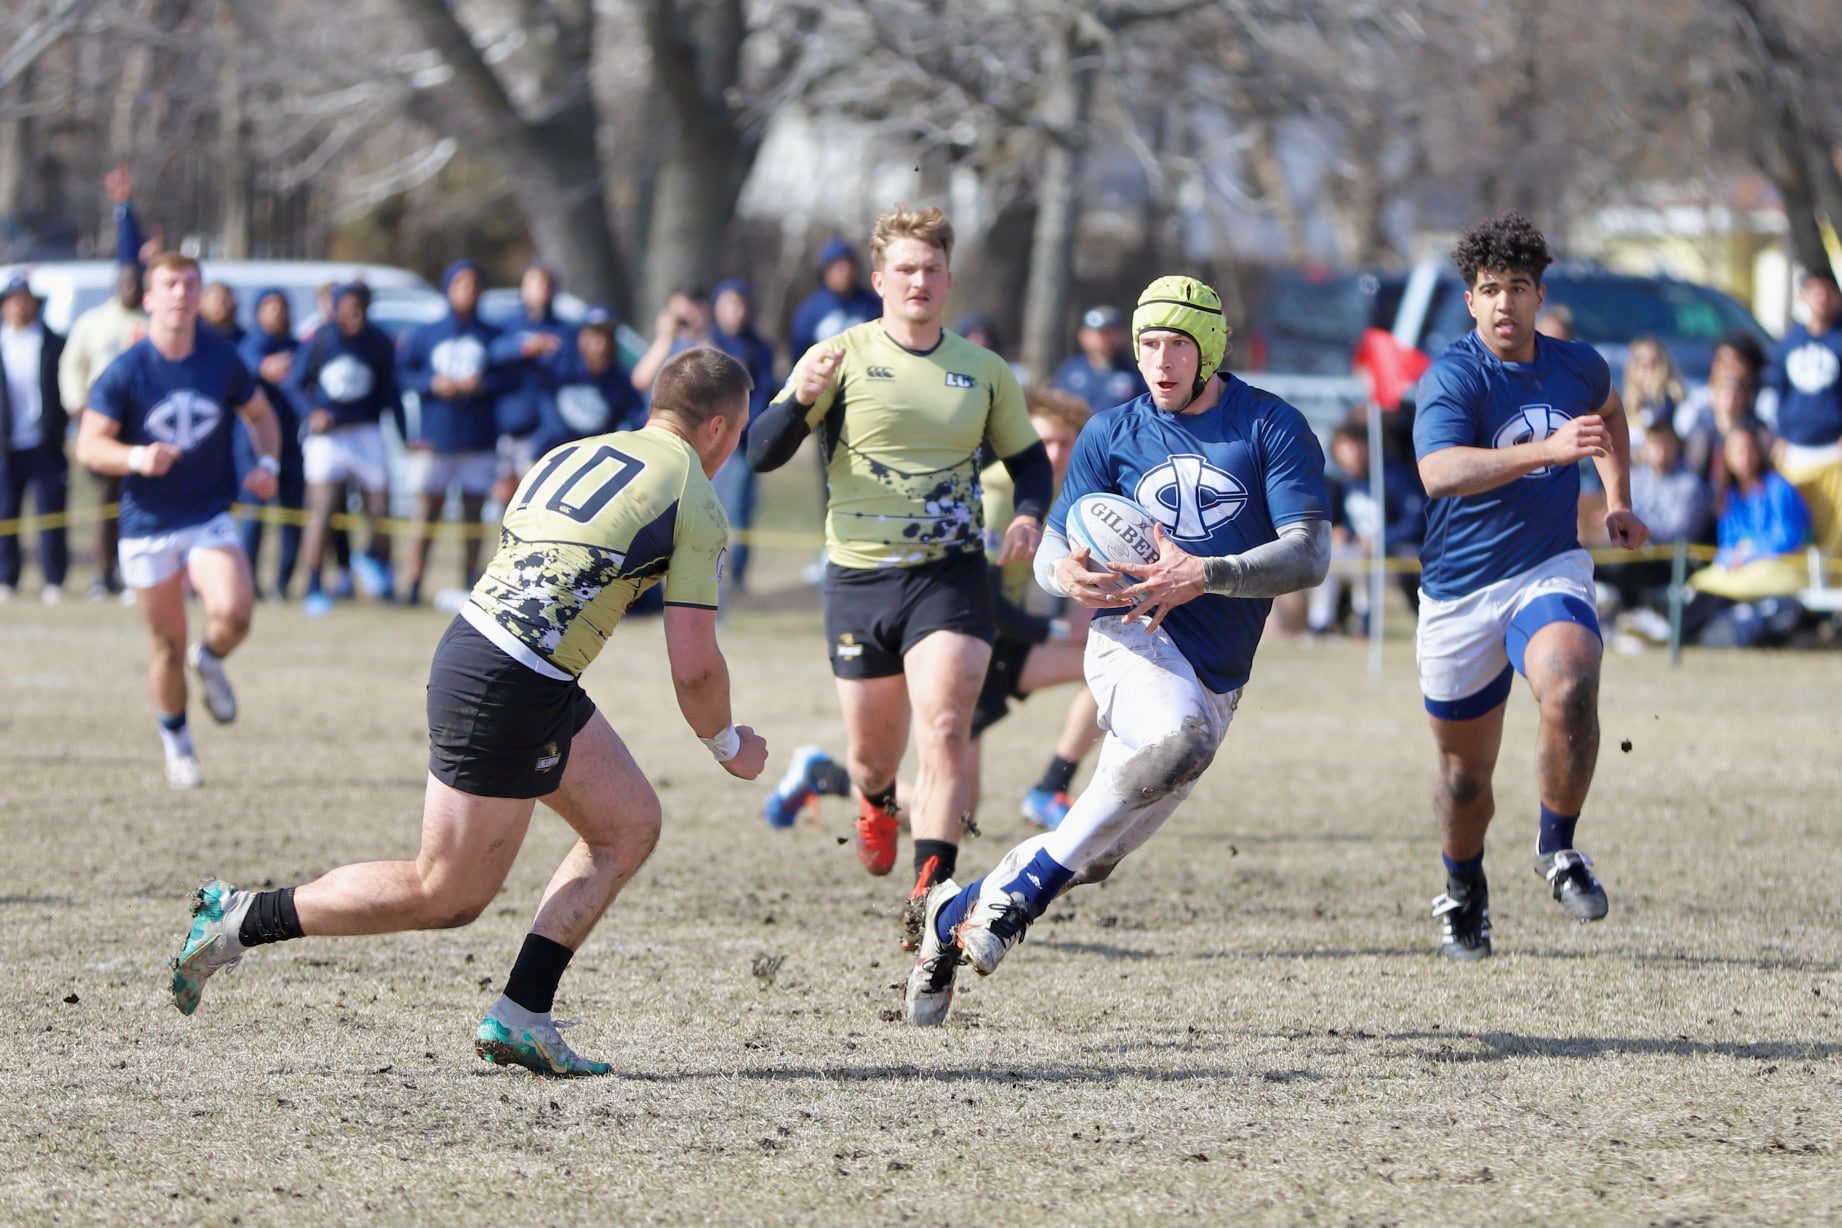 Tritons look to punch ticket to CRC nationals